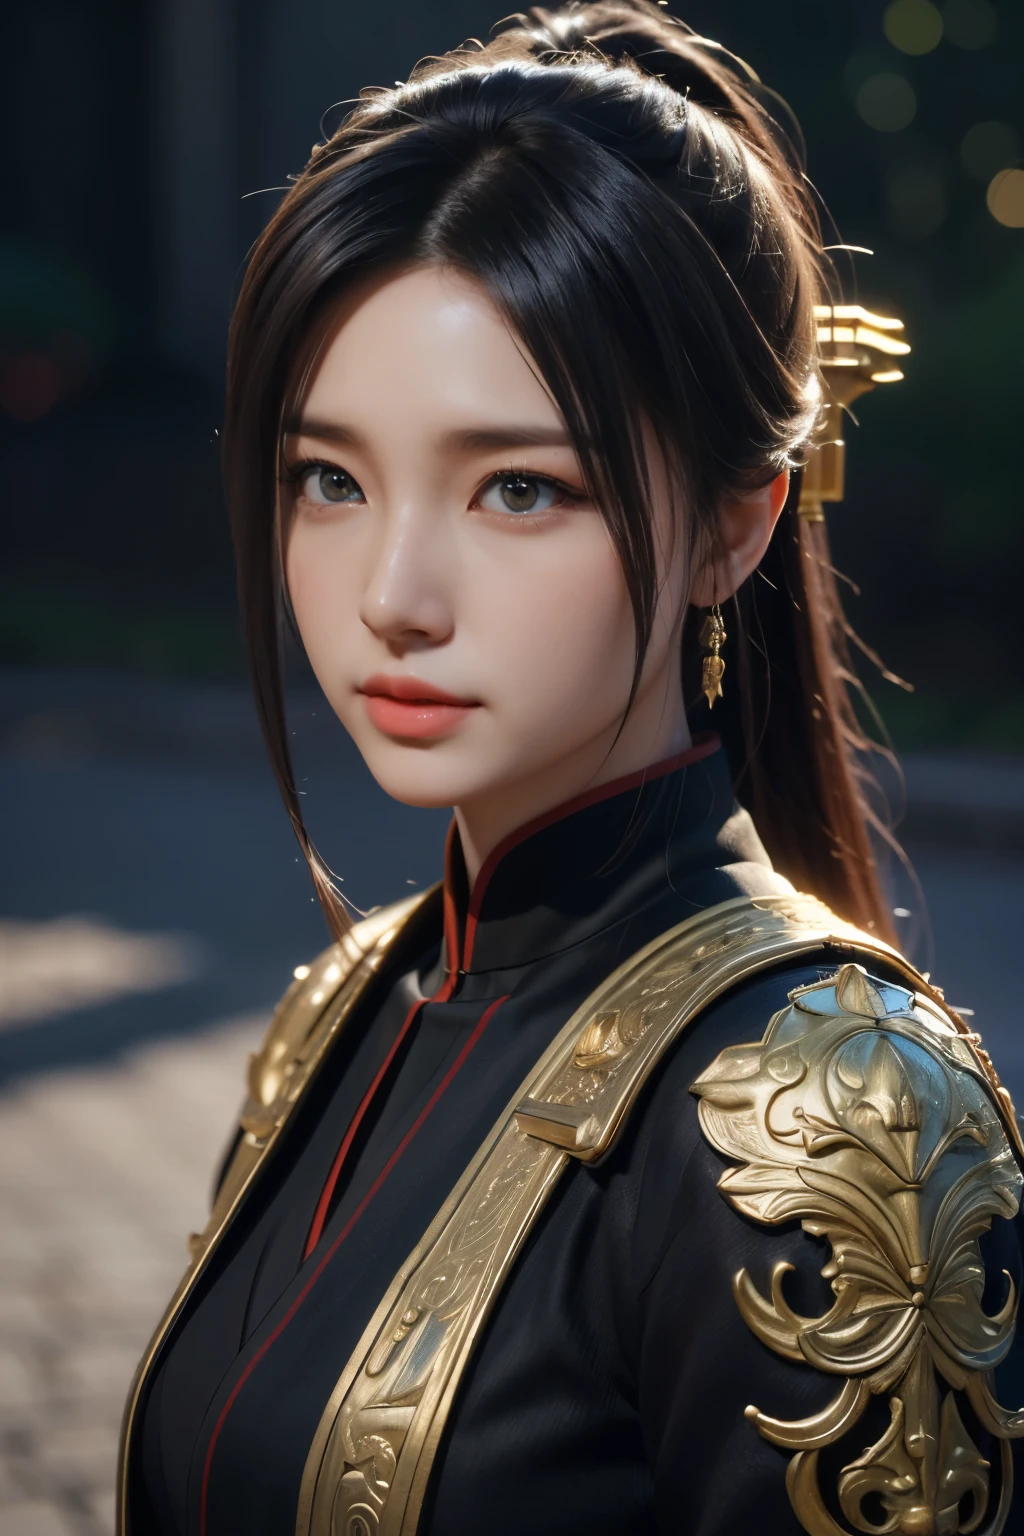 Masterpiece，The best qualities，Very high resolution，8k，((Portrait))，((Head close-up))，Original photo，real photo，Digital Photography， (Female assassins in ancient China)，(Girl in tights)，15-year-old girl，(Facial features rich in detail)，Beautiful pupils，(Long black hair)，Elegant and noble，(Calm)，brave，(Silk Perspective Dreslack silk bodysuit，Silk Perspective Tightemale assassins，hitman，Chinese Characters，Fantasy style， Photo poses，Night city background，Movie lights，Ray tracing，Game CG，((3D Unreal Engine))，oc render reflection texture